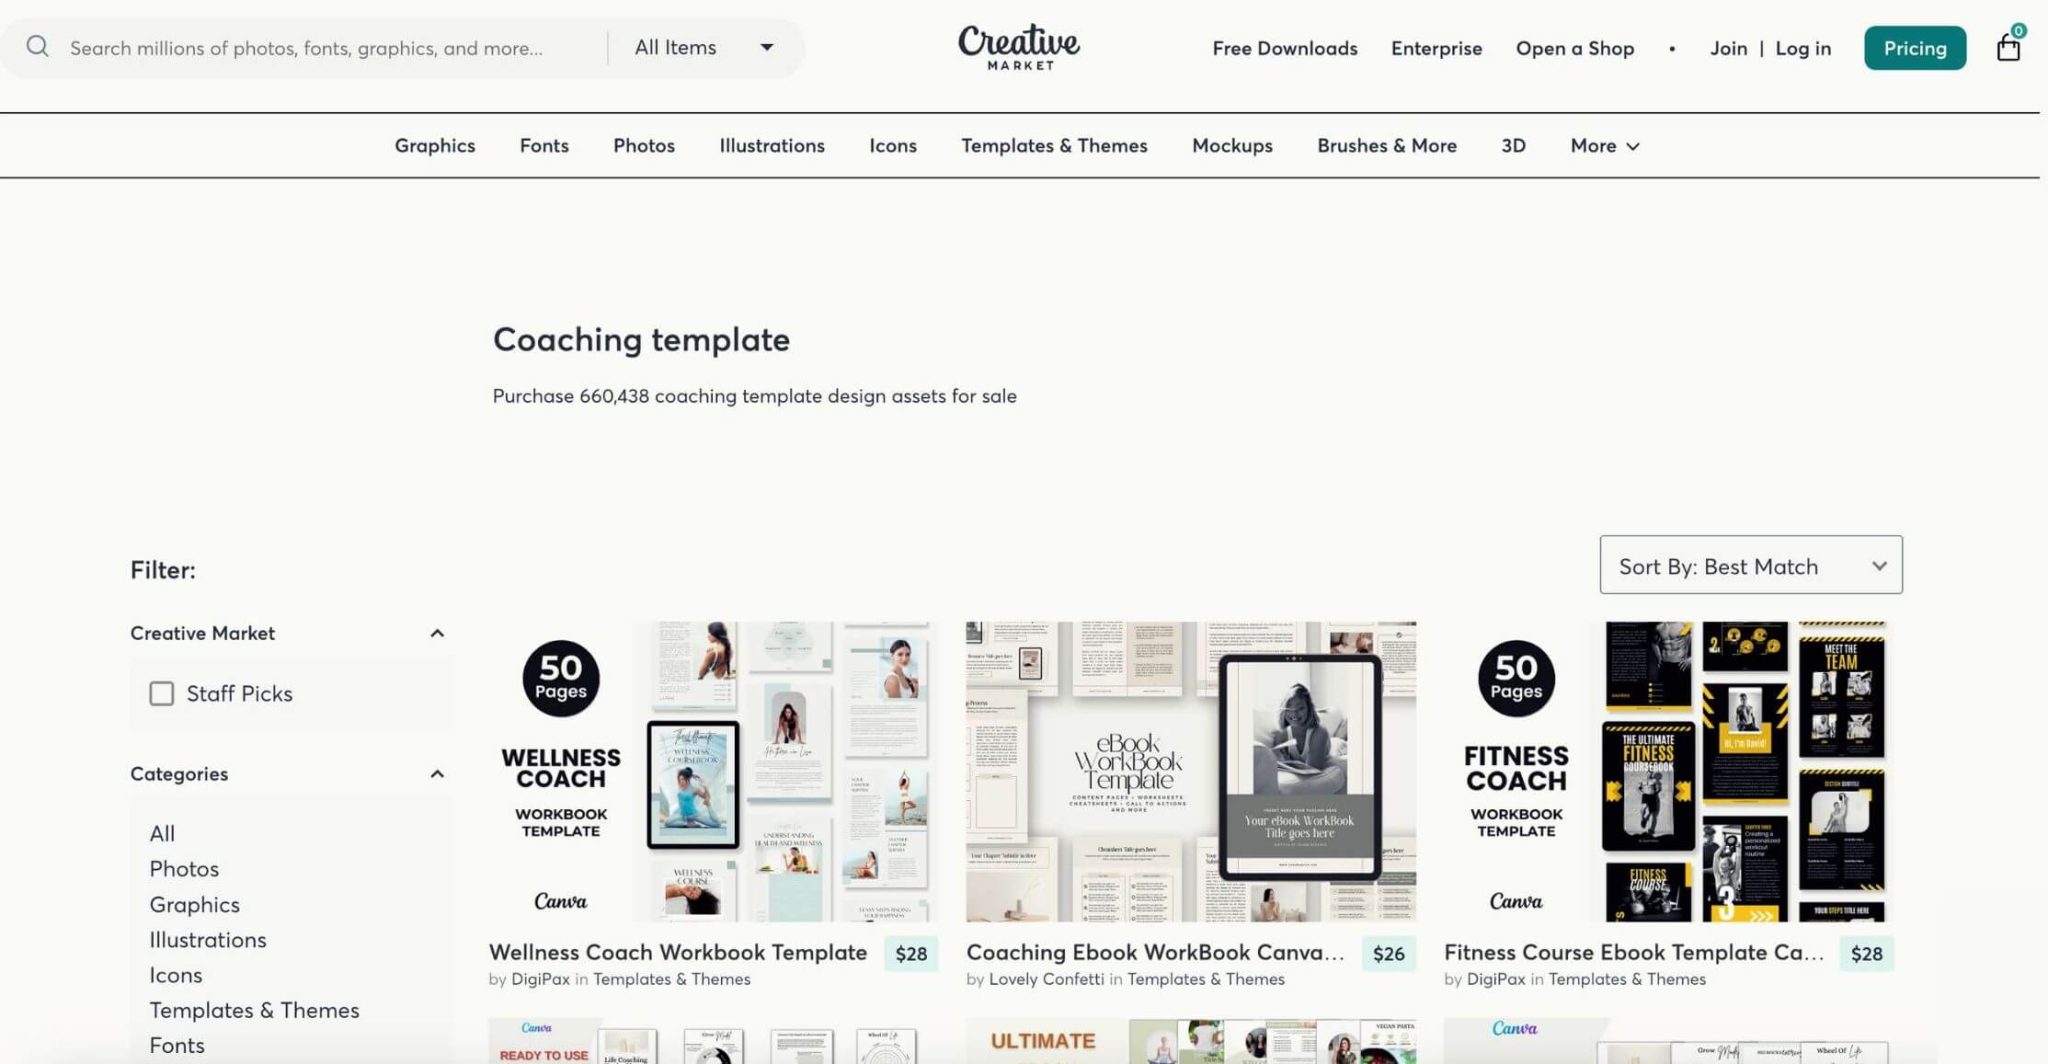 A screenshot from the home page of Creative Market and their canva templates